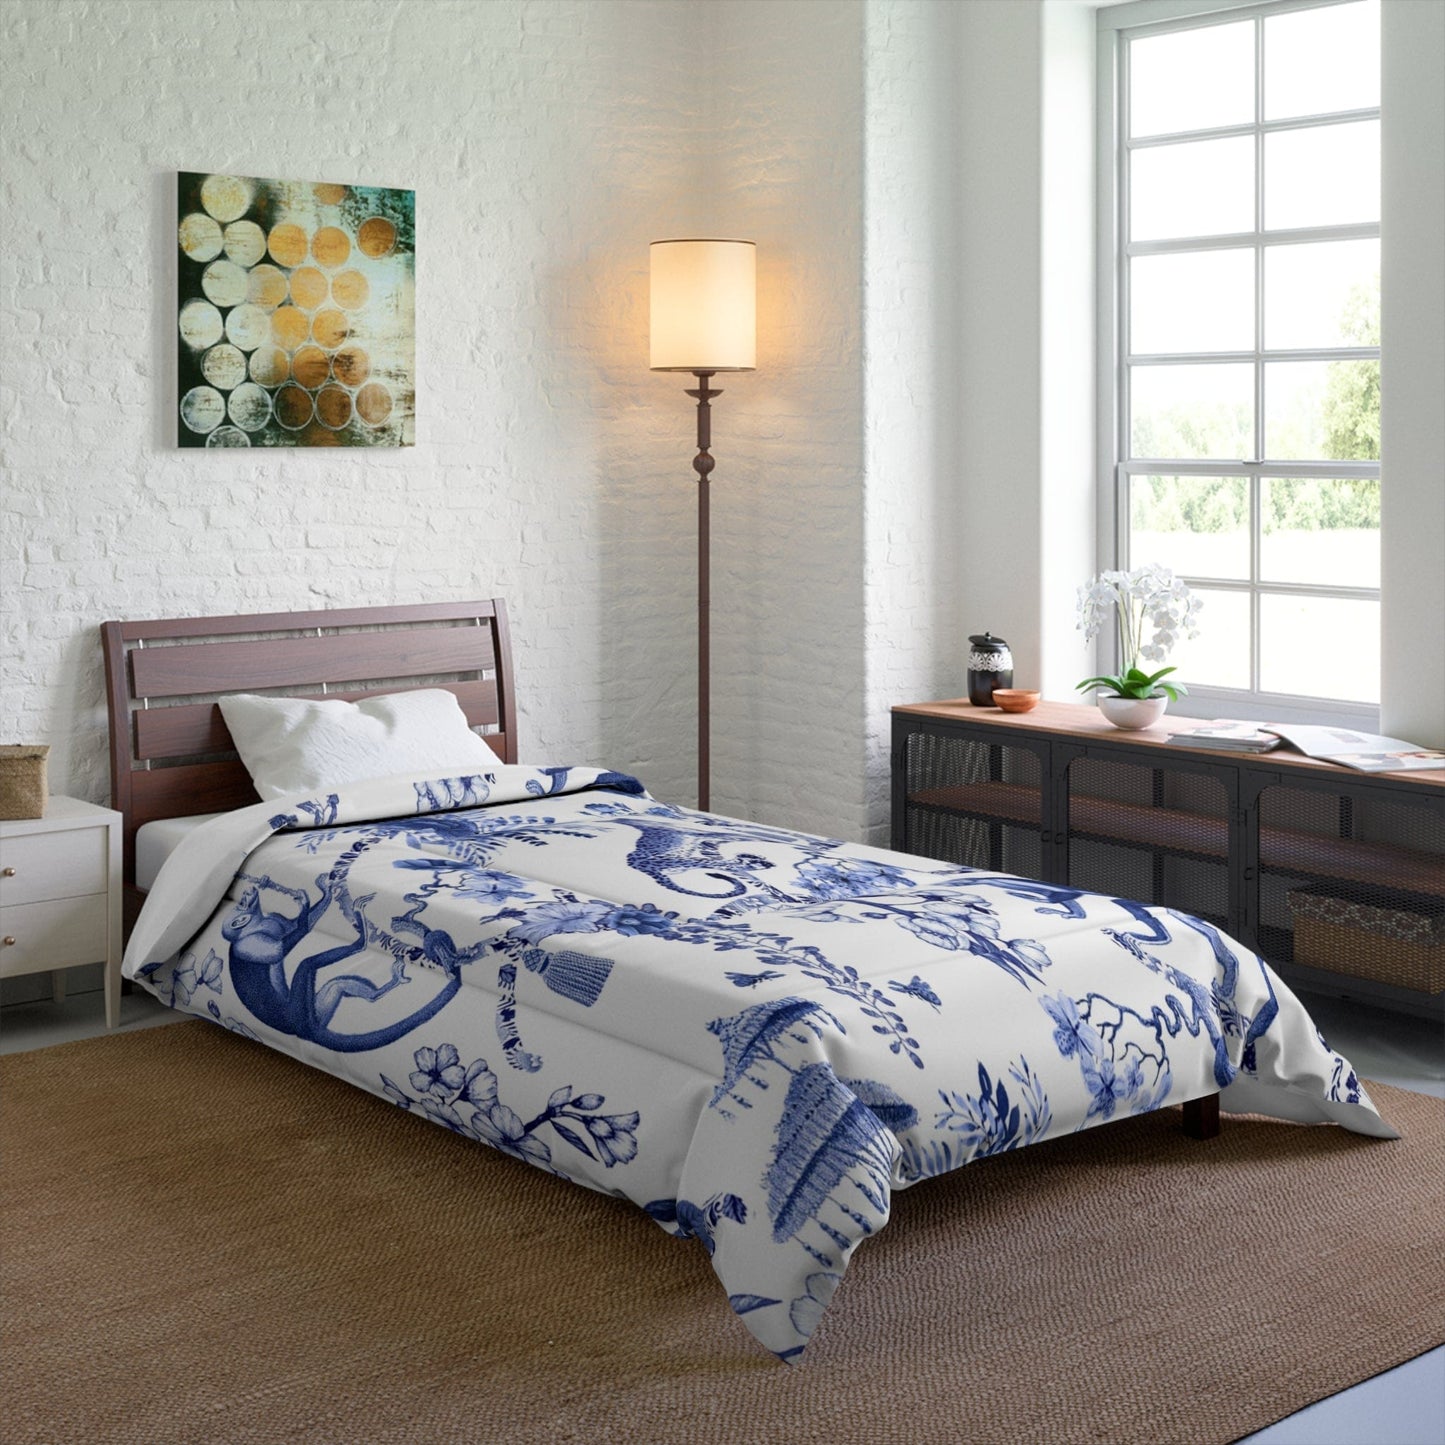 Kate McEnroe New York Floral Blue and White Chinoiserie Jungle Botanical Toile Comforter Comforters 68" × 92" 31736806517057842393